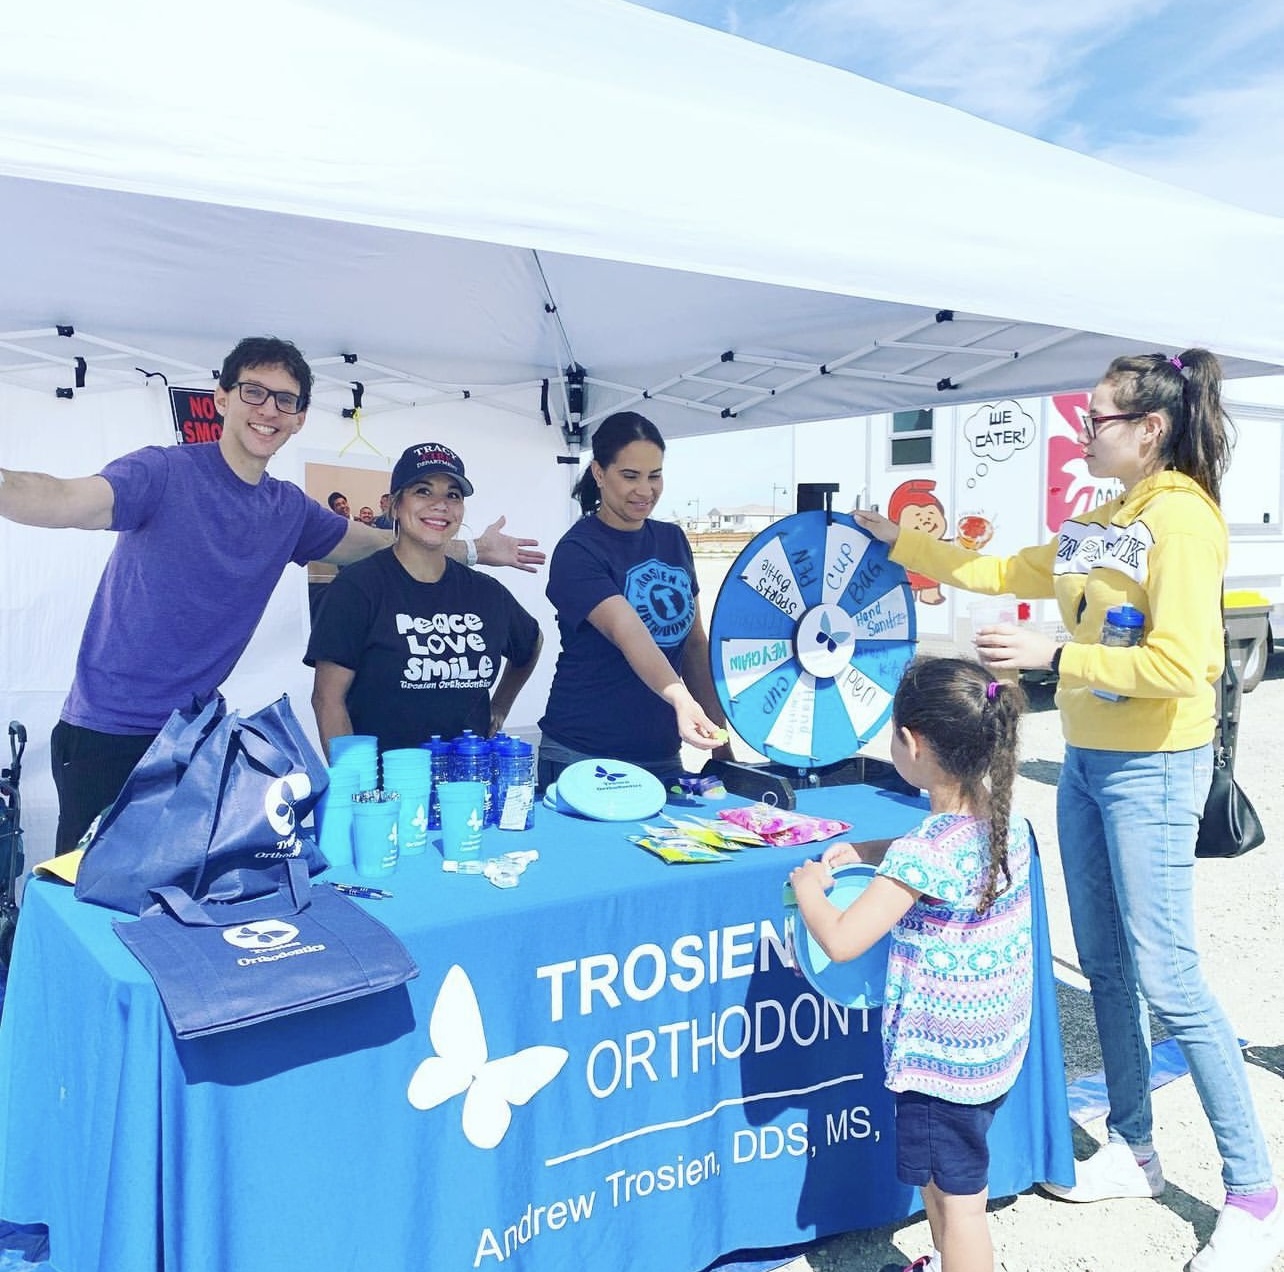 Trosien Orthodontics staff behind an information table at a community event